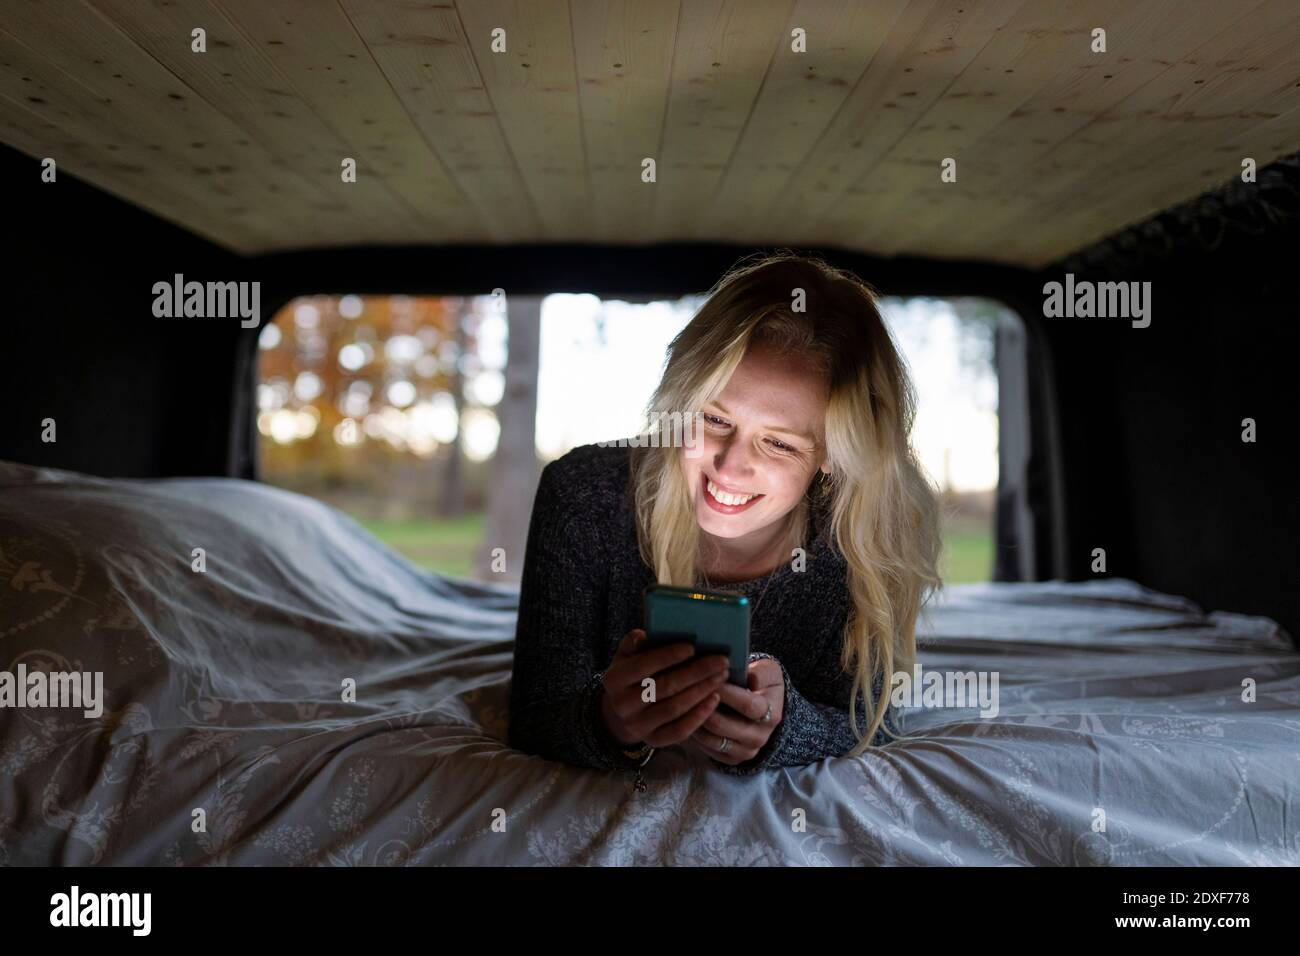 Smiling woman with blond hair lying on bed while using smart phone in camper van Stock Photo